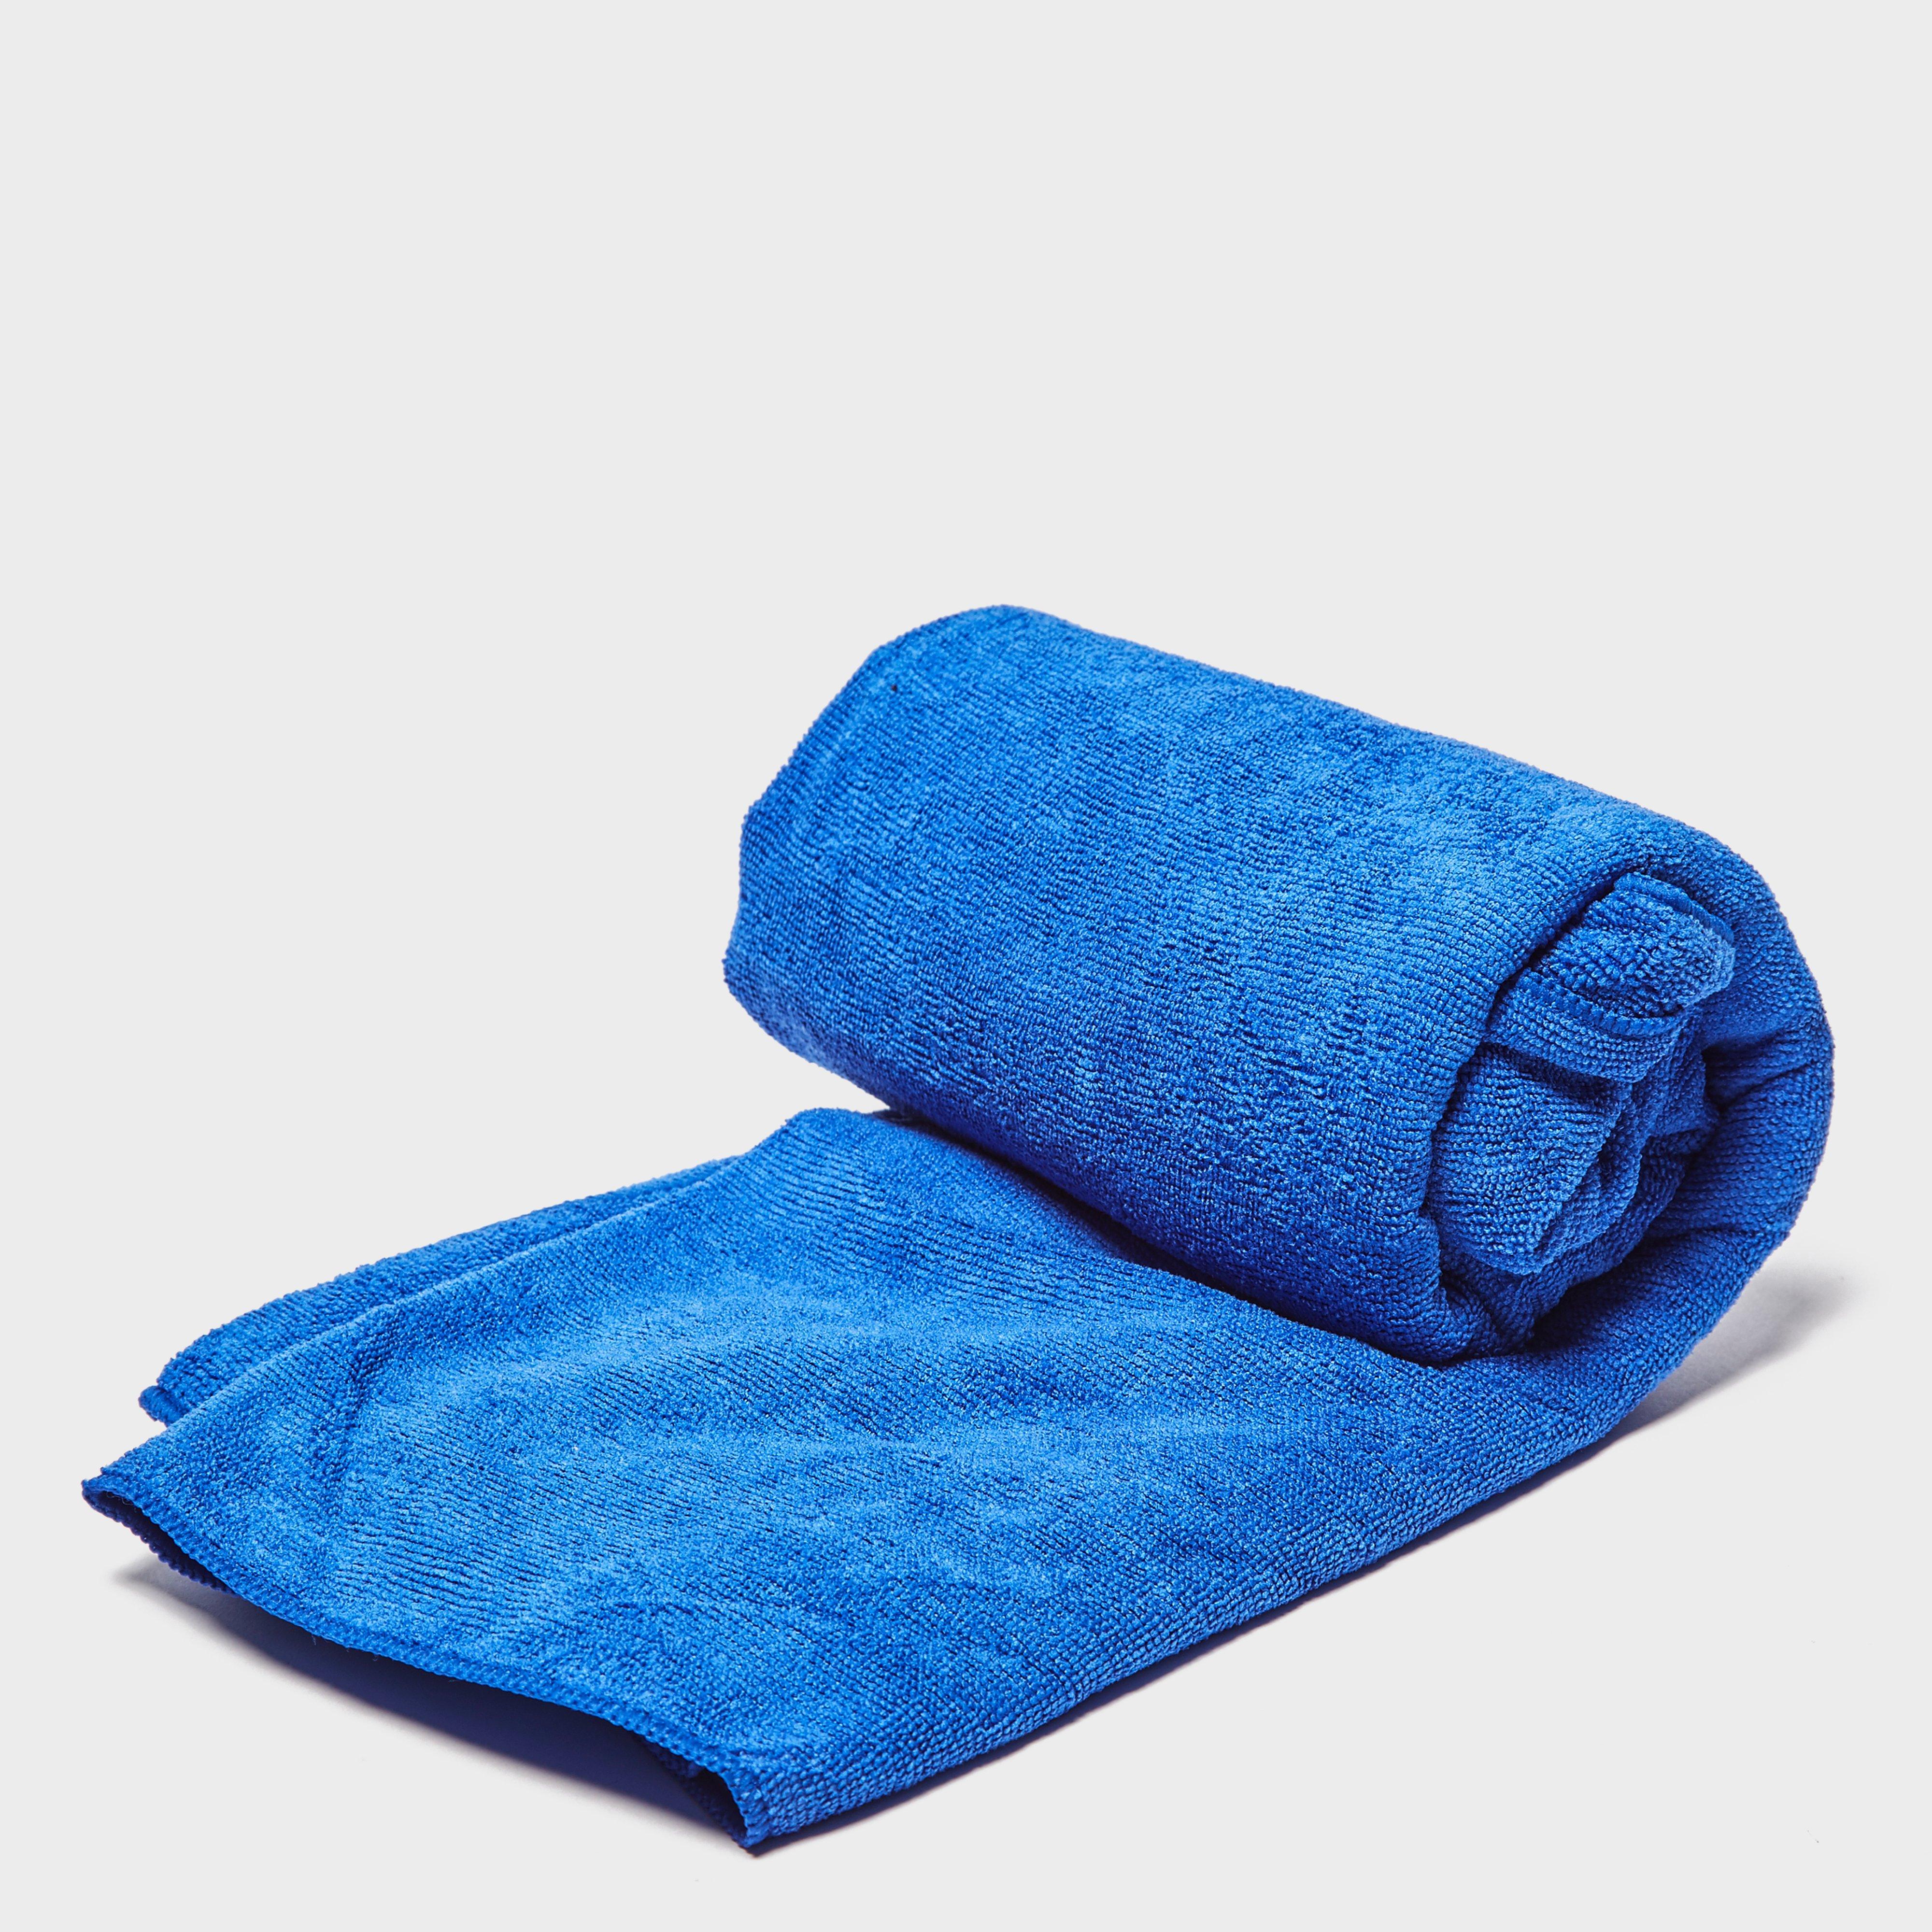 Eurohike Terry Microfibre Travel Towel - Large Review